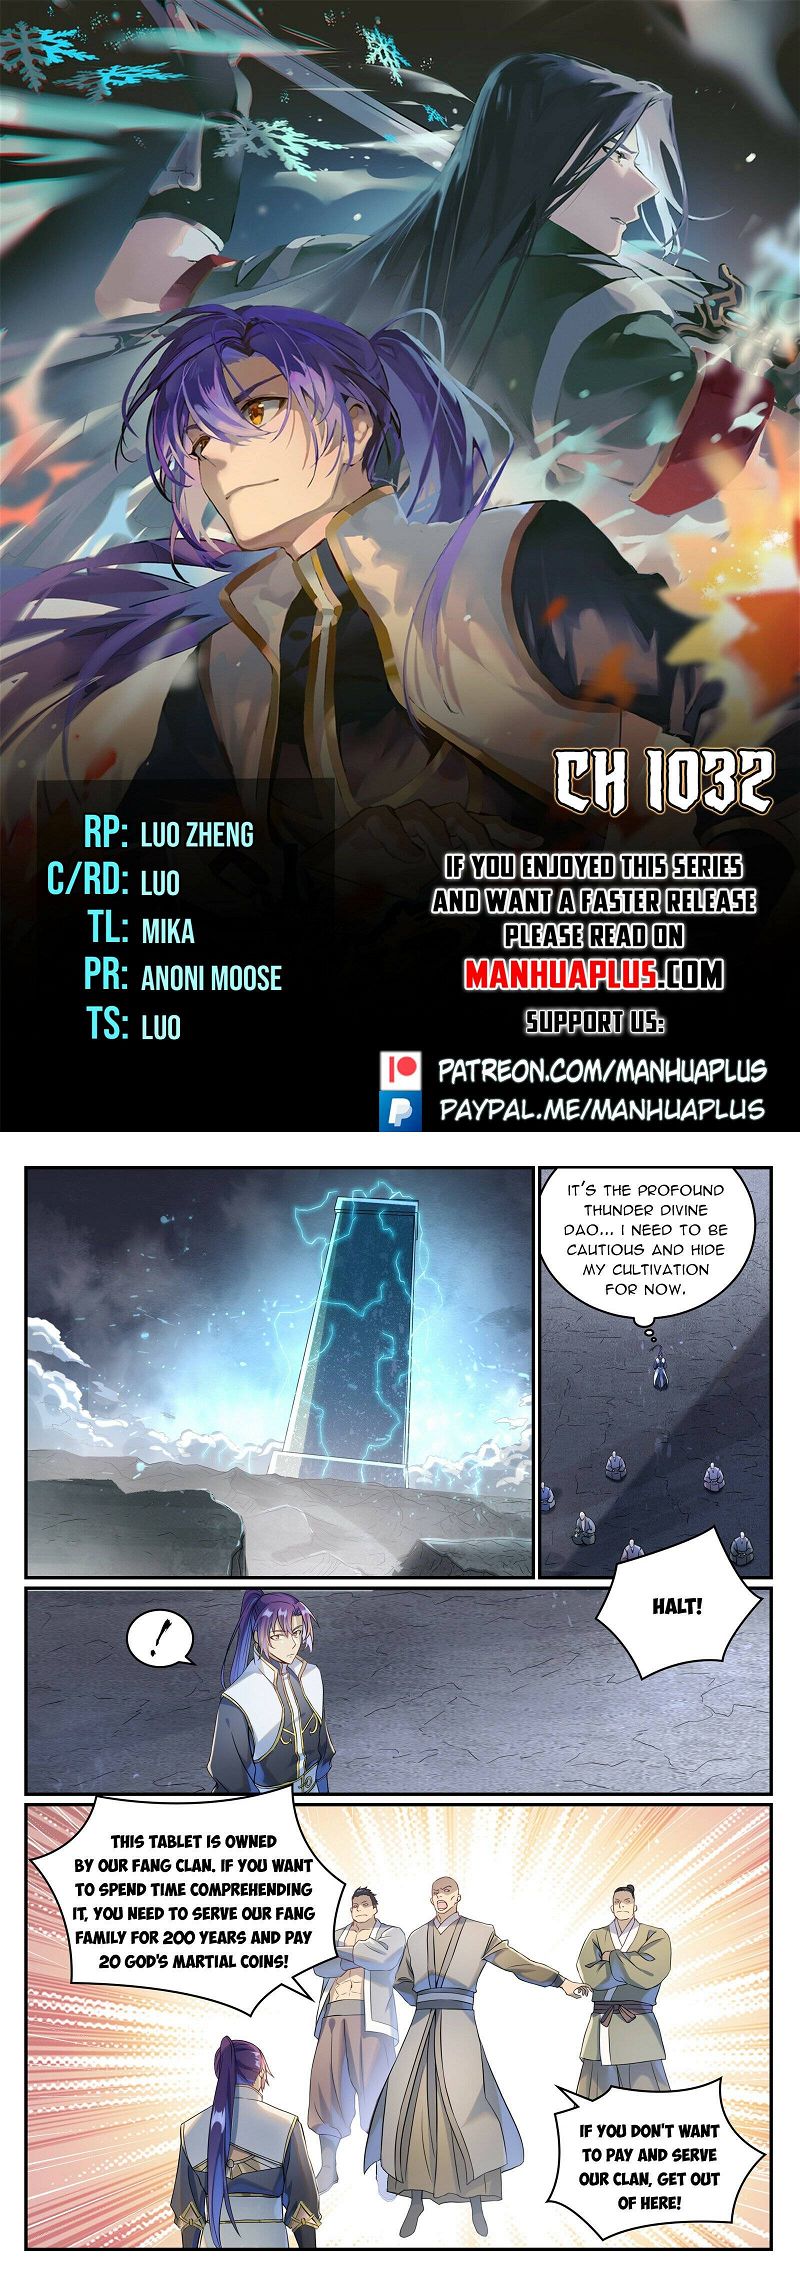 Apotheosis – Ascension to Godhood Chapter 1032 page 1 - MangaWeebs.in